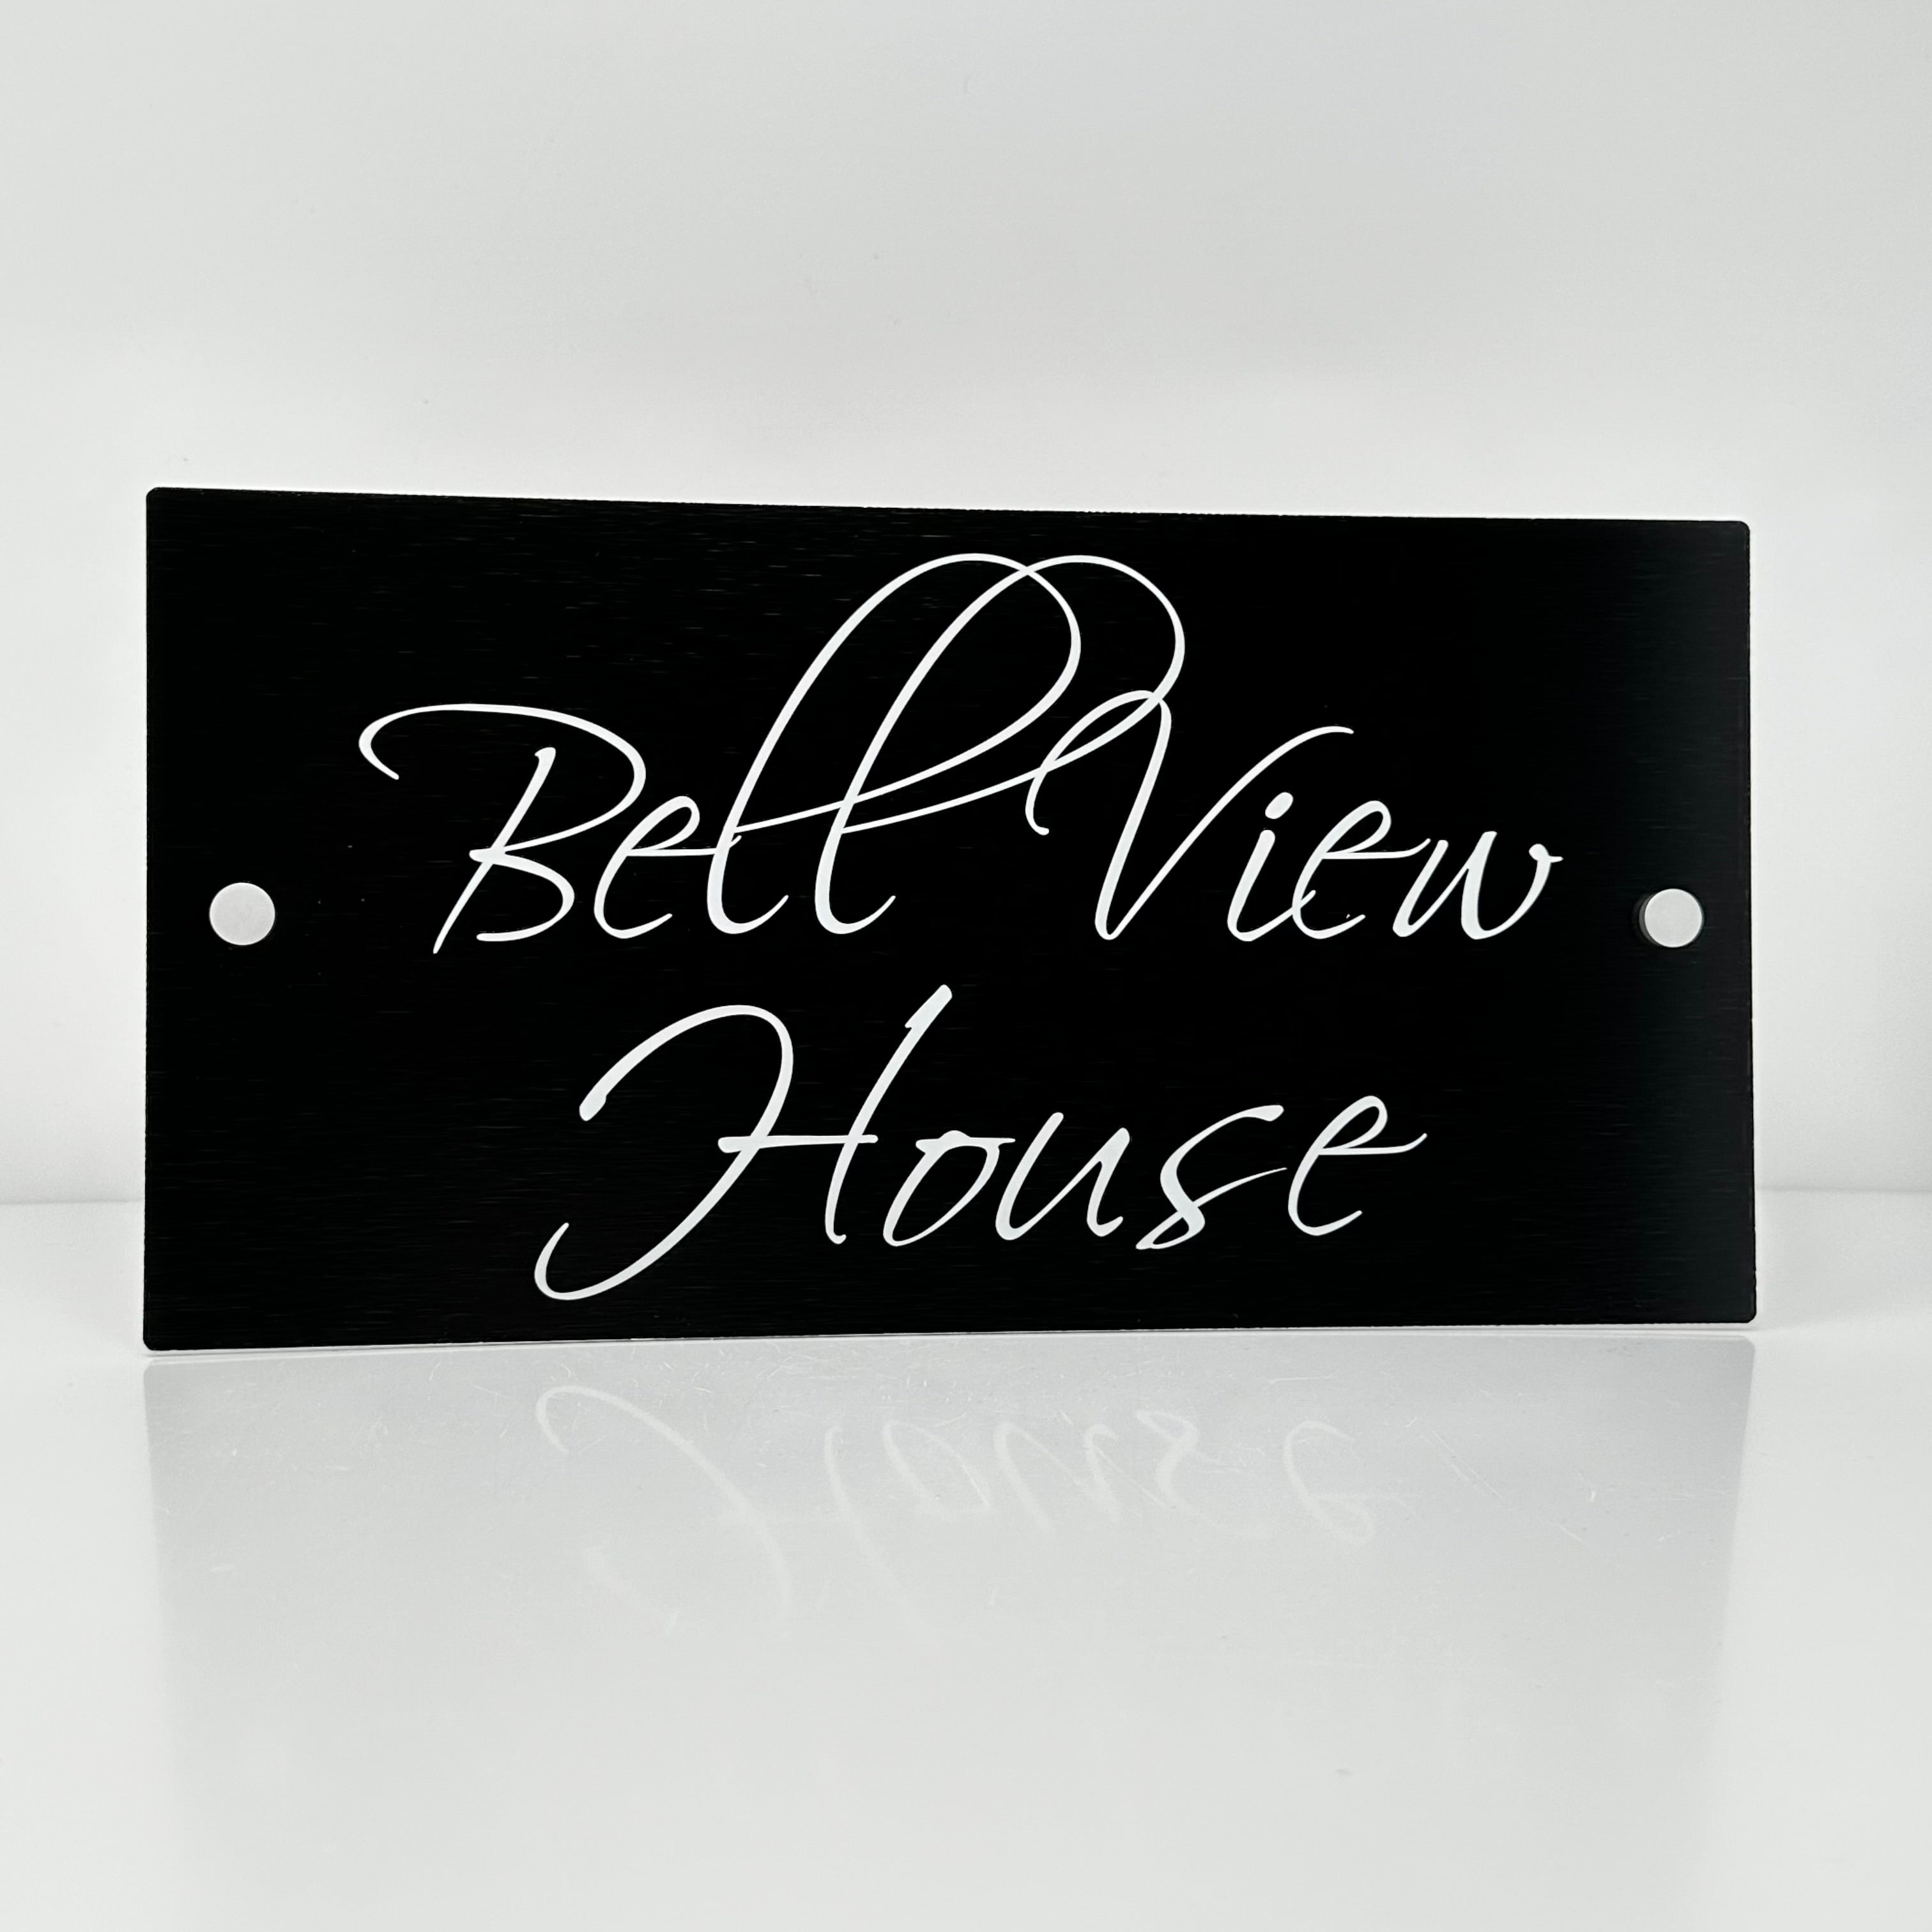 The Bell View Modern House Sign with a Brushed Black Panel and Satin Silver Stand Off Fixings ( Size - 35cm x 18cm )